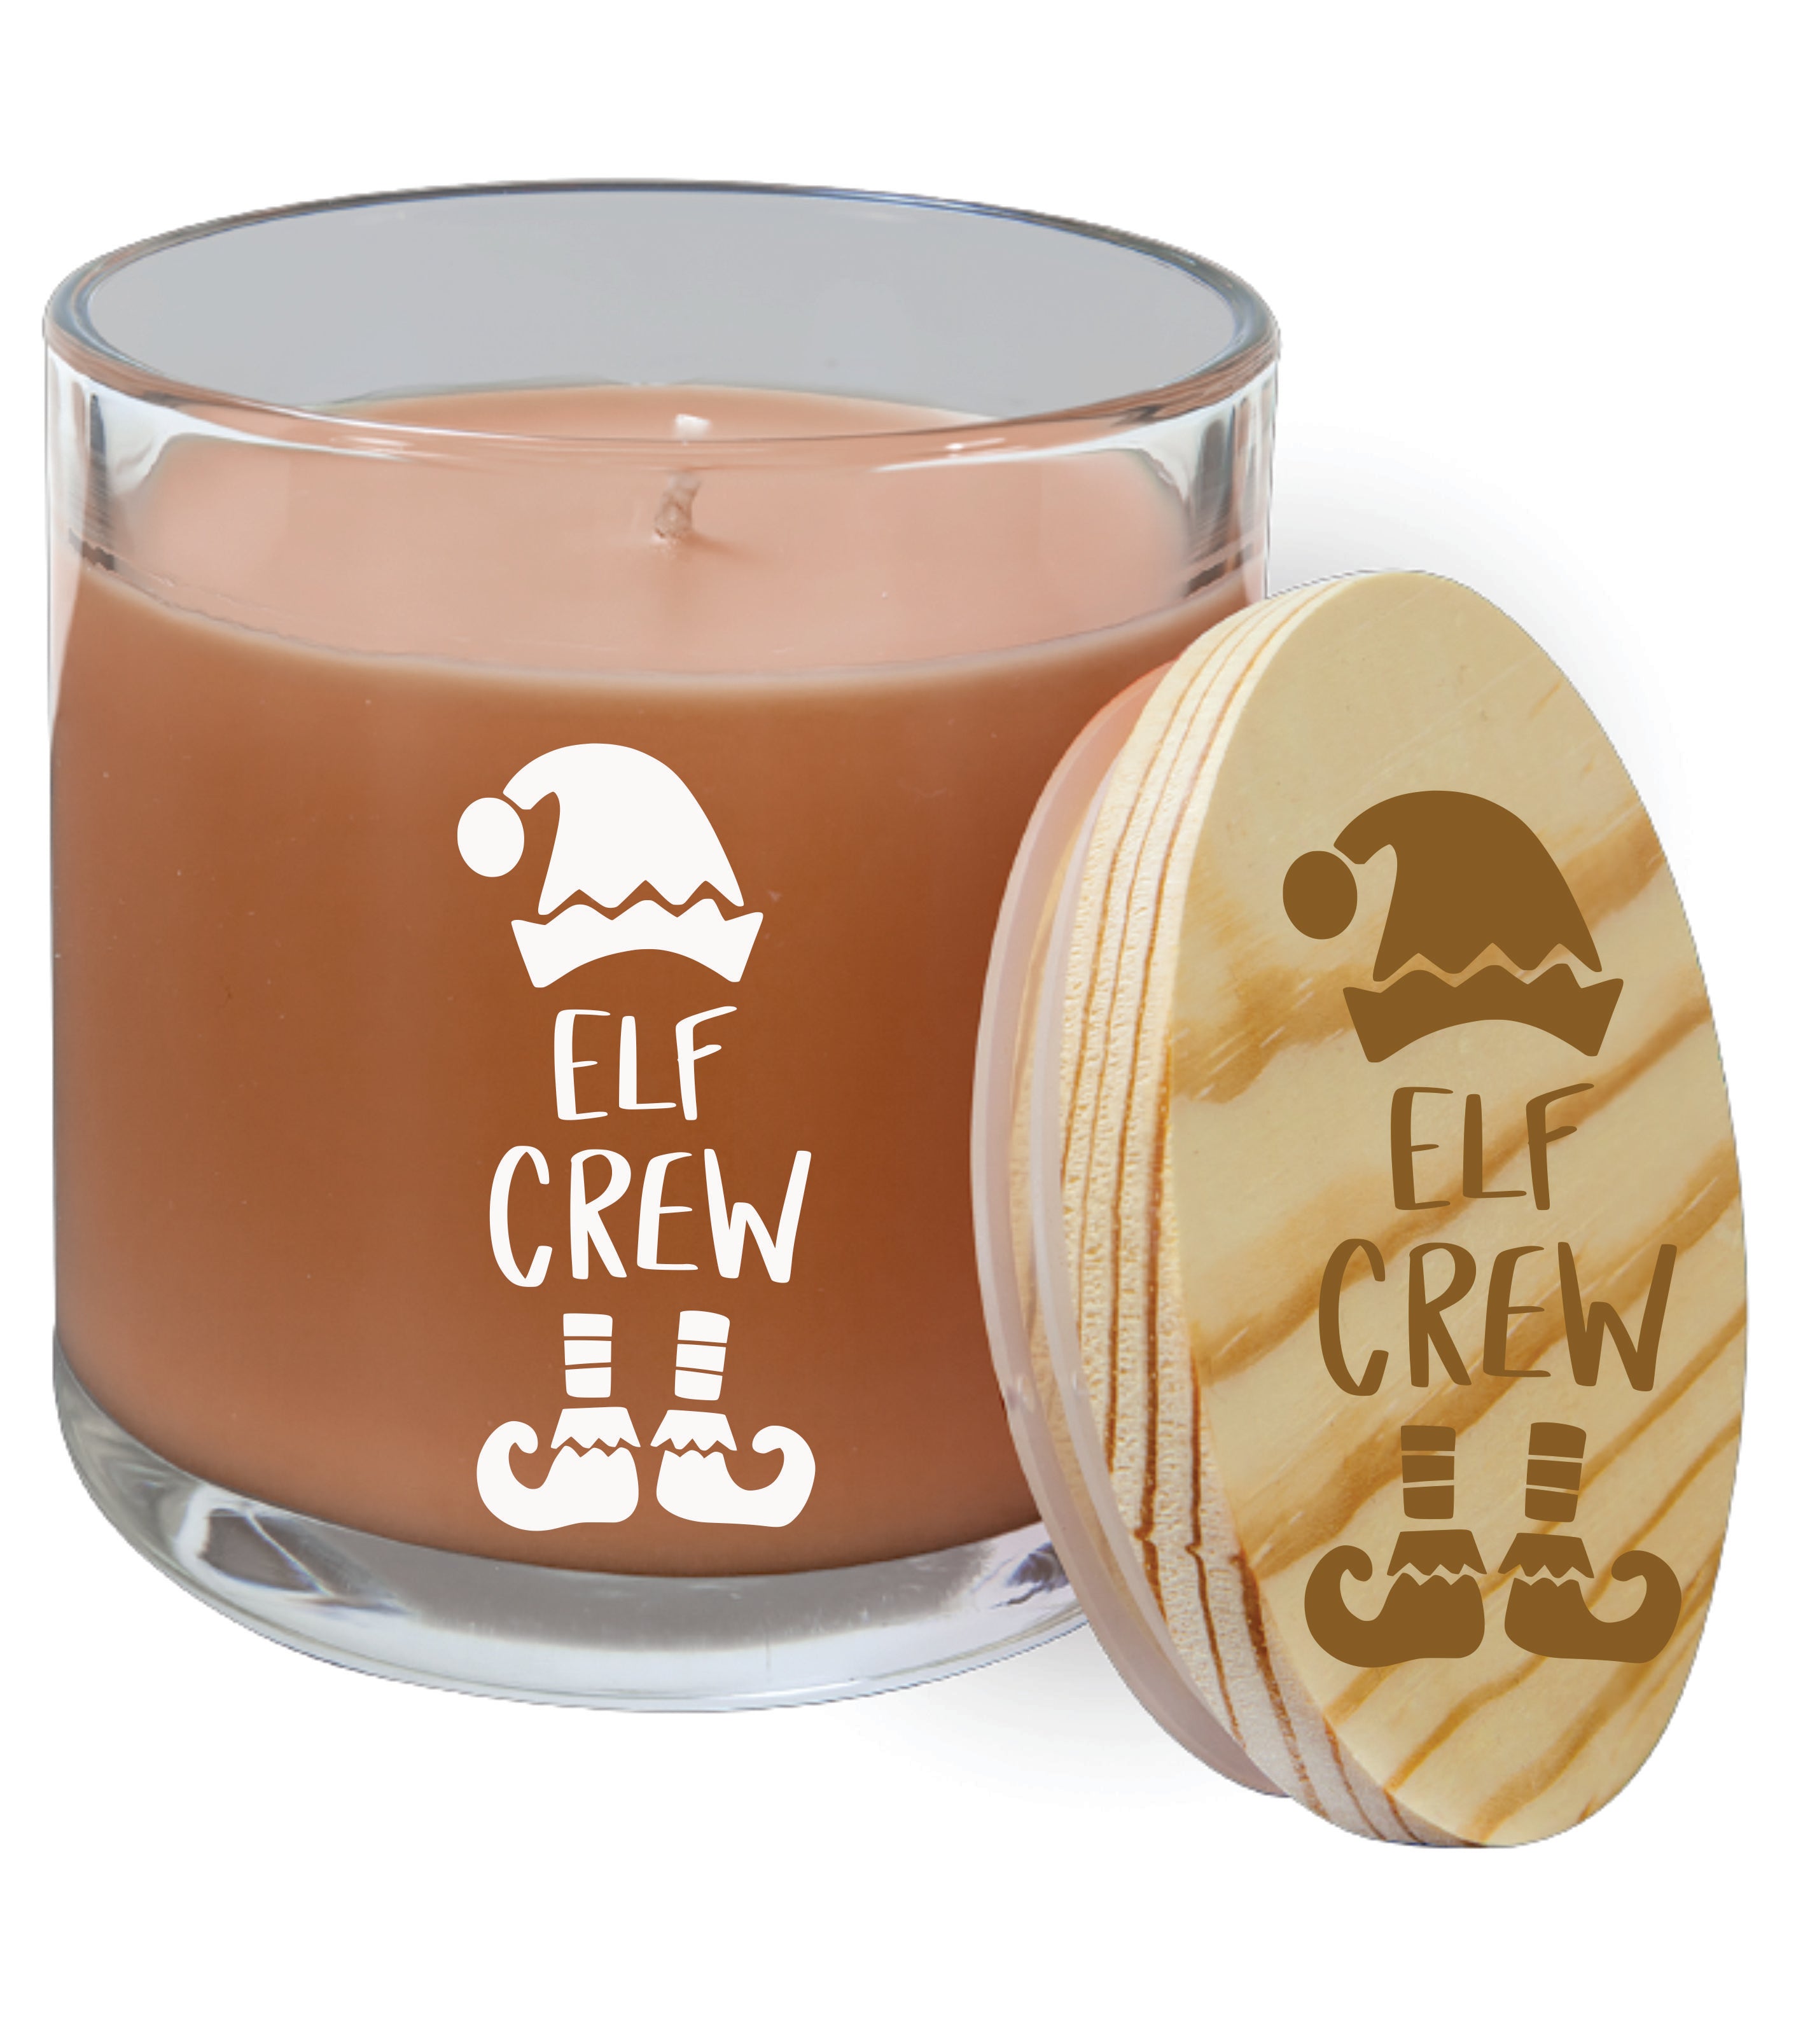 14 oz. Tropical Coconut Candle in a Glass Holder with Wood Lid